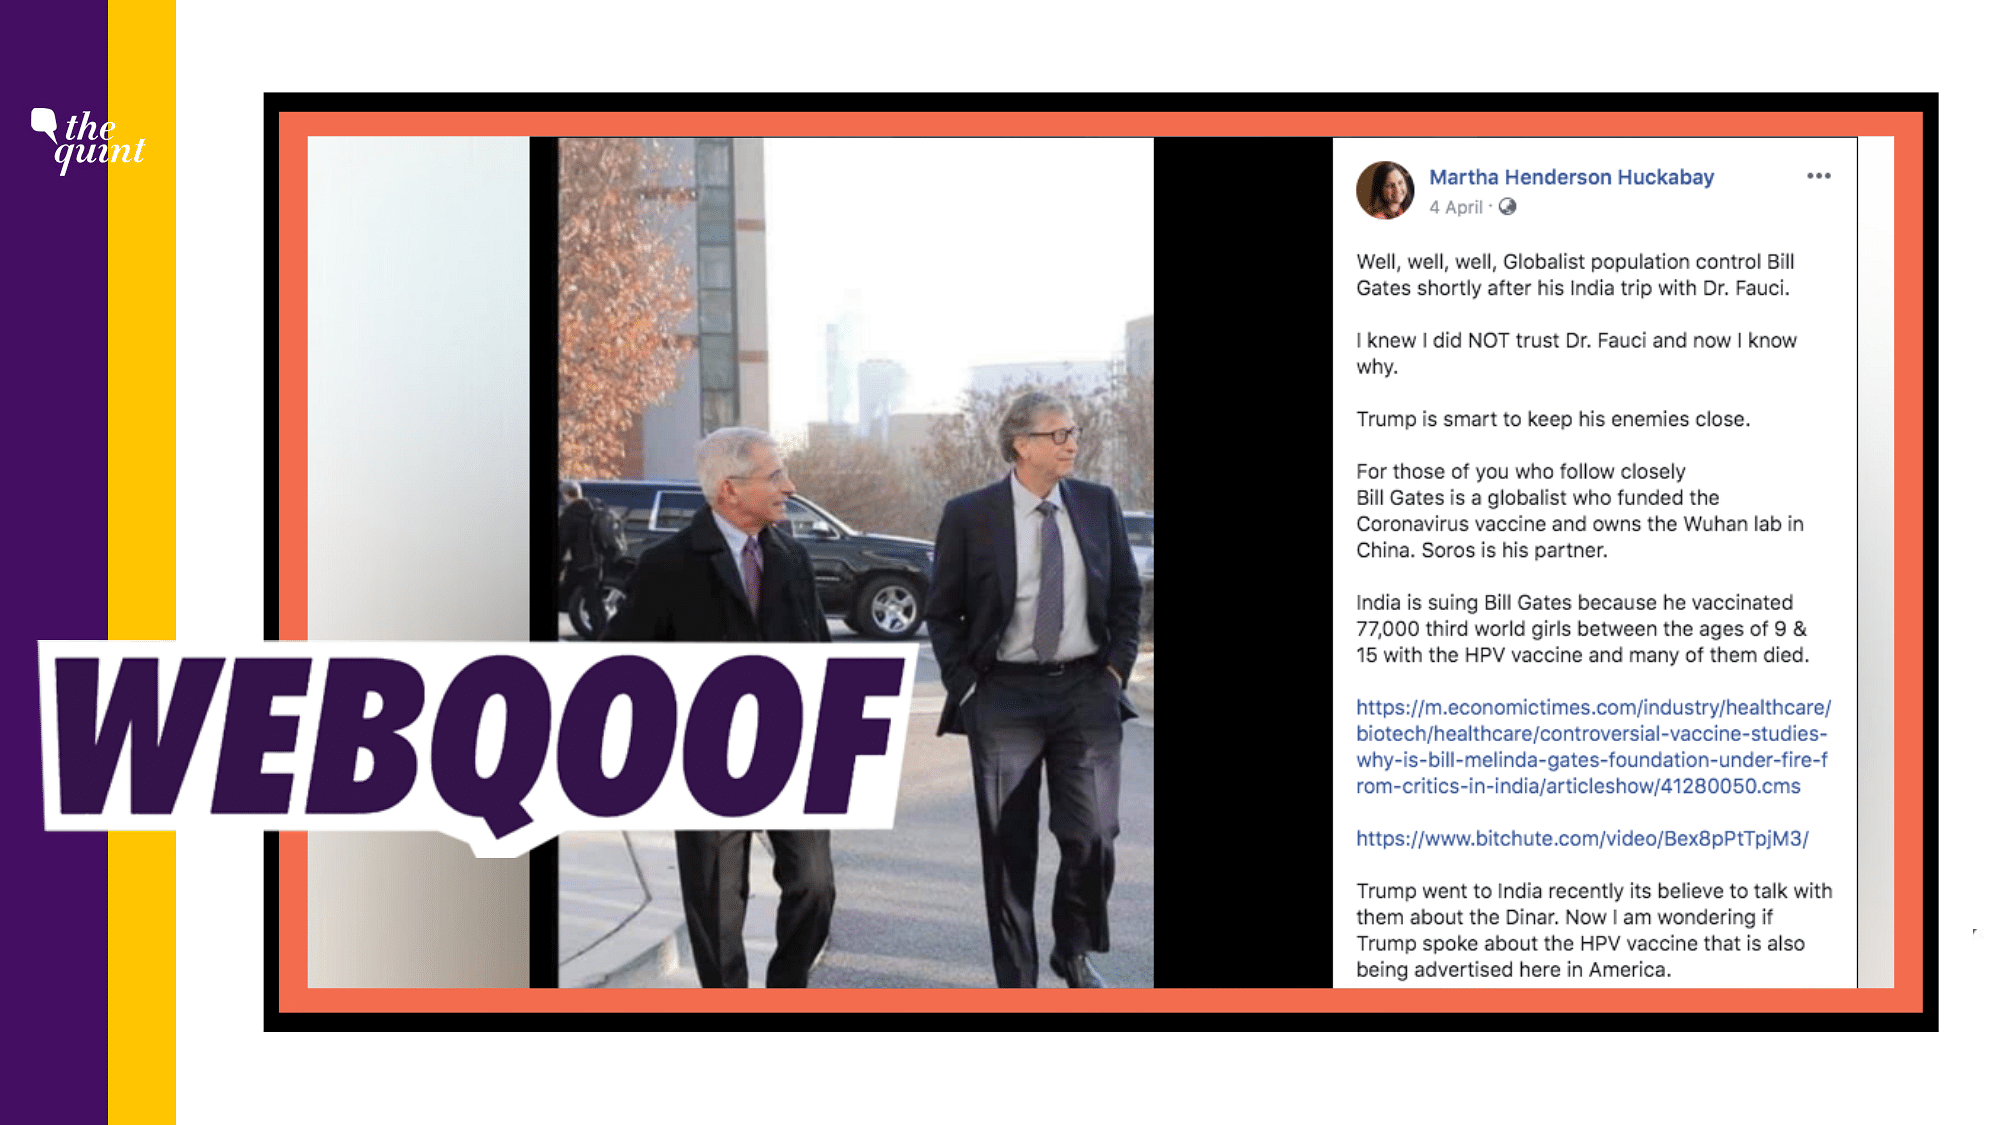 The post also claims that Bill Gates is a “globalist who funded the coronavirus vaccine and owns the Wuhan lab in China.”